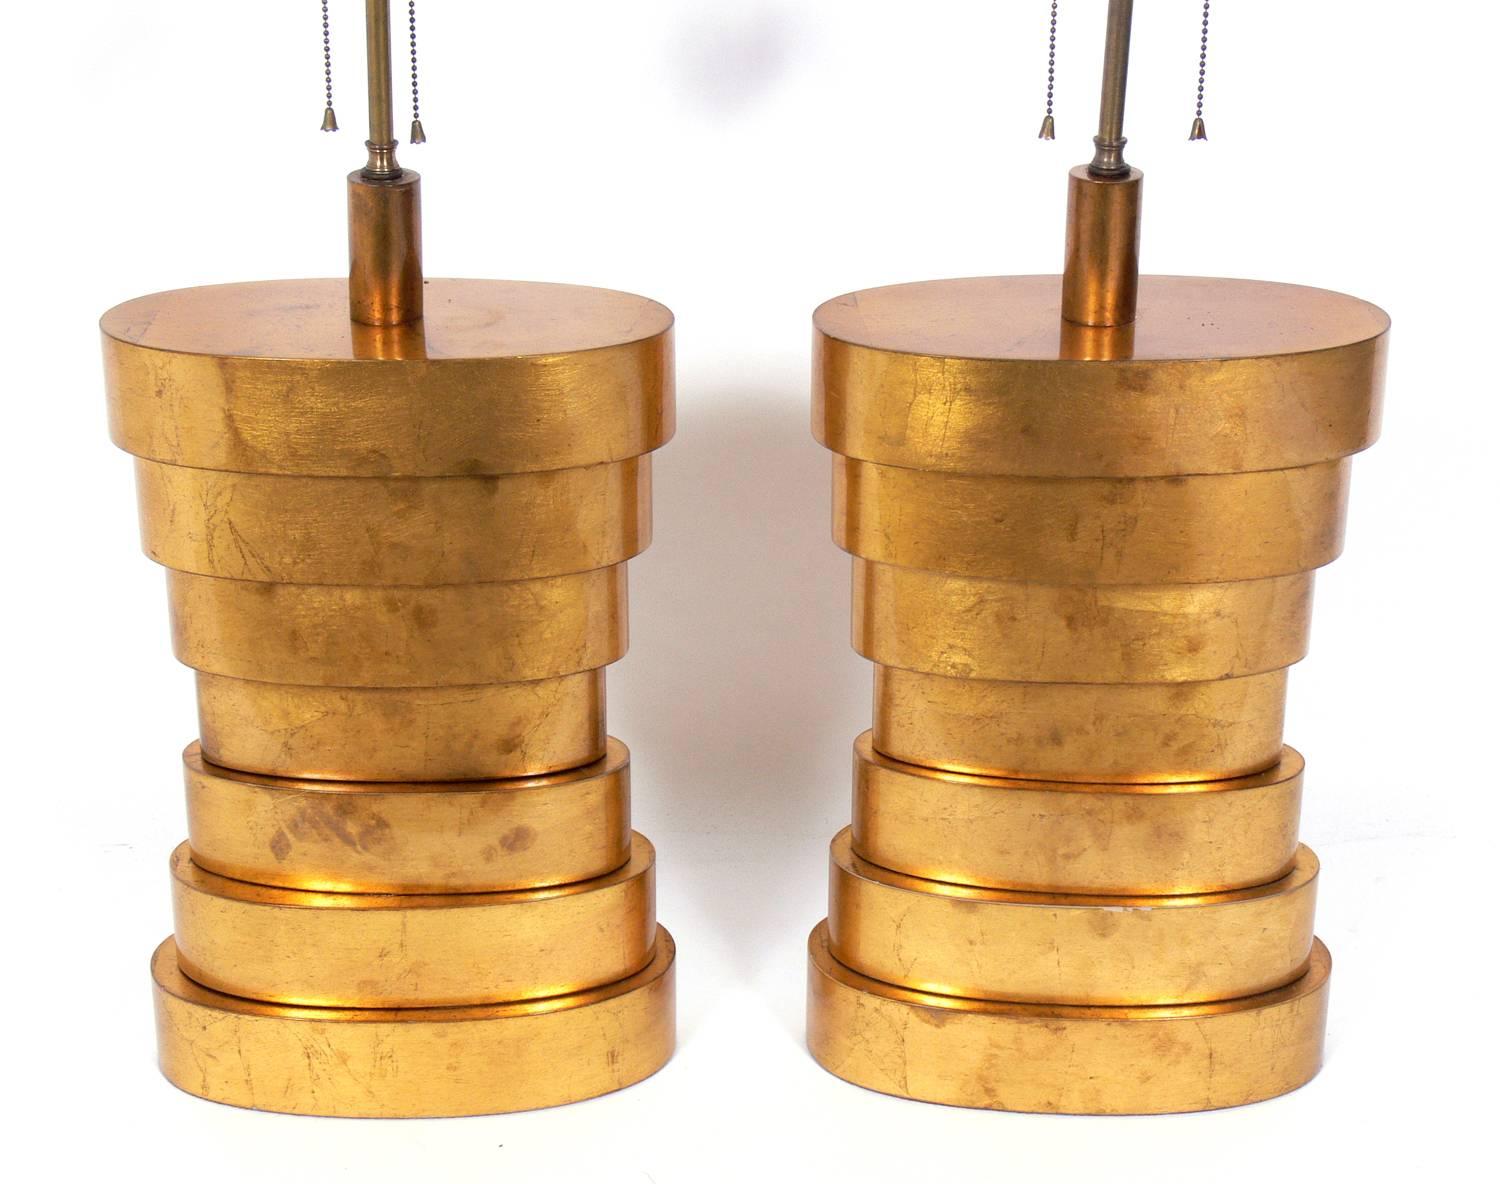 Large-scale gold leafed stacked lamps, American, circa 1950s. Very sculptural forms retaining wonderful original patina. They have been rewired and are ready to use. Price noted below includes shades.